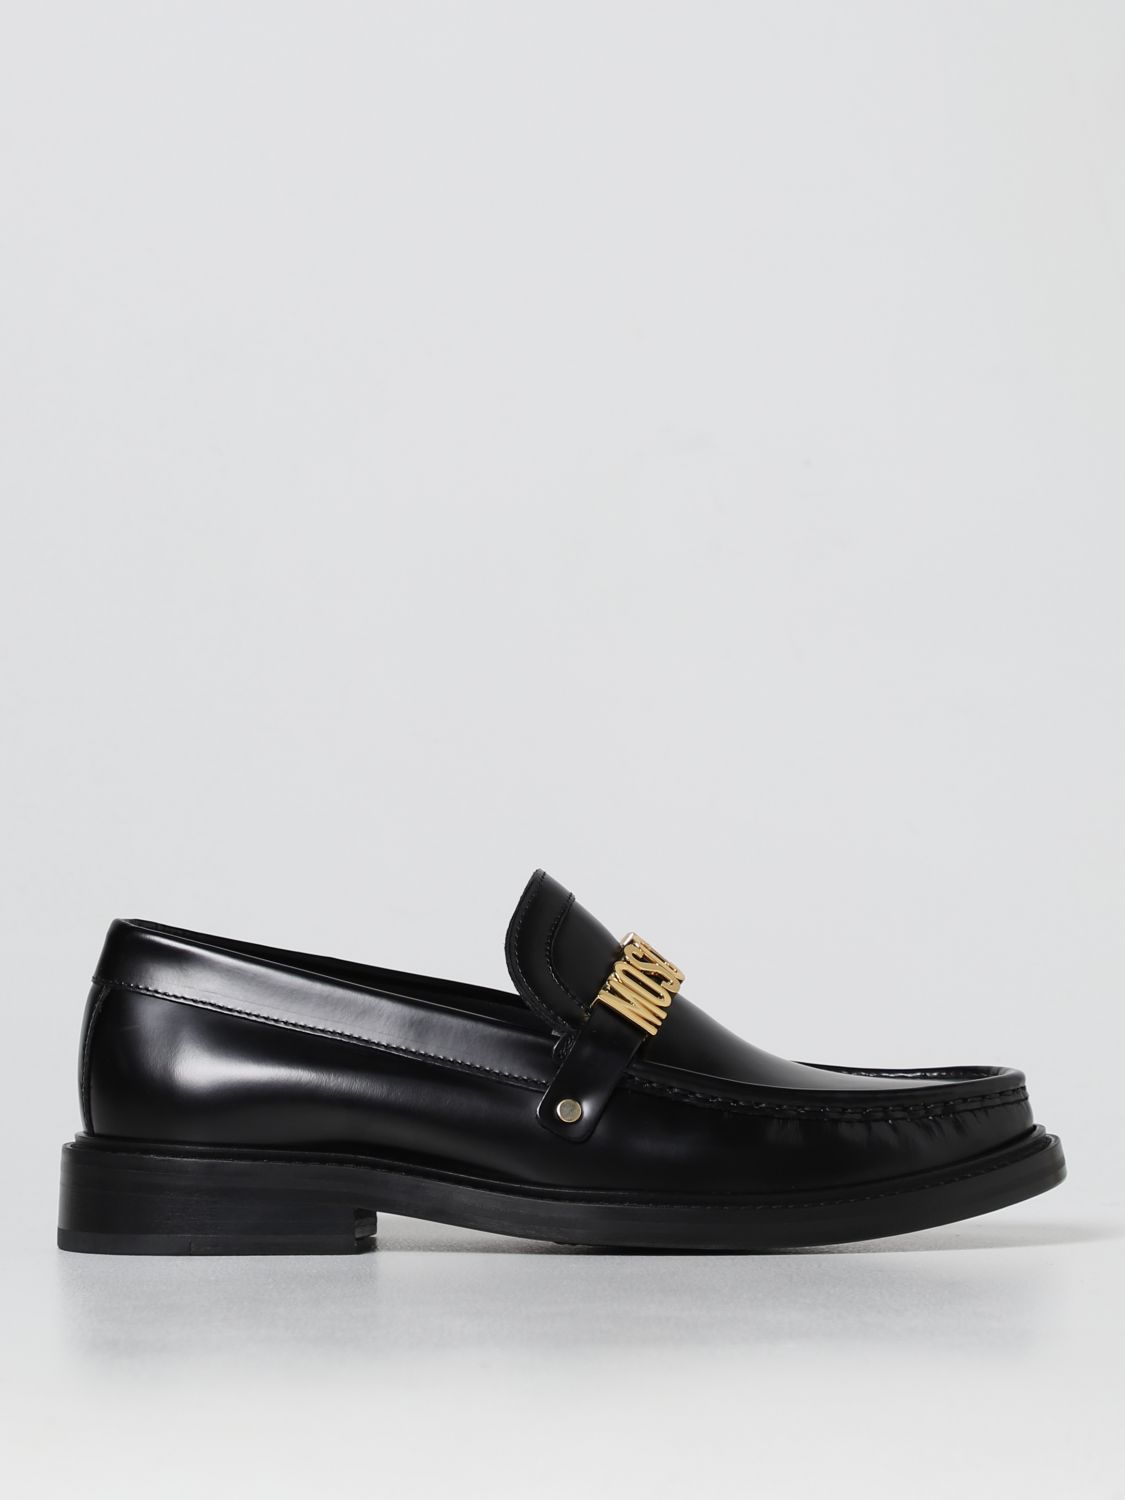 MOSCHINO COUTURE: brushed leather loafers - Black | Moschino Couture ...